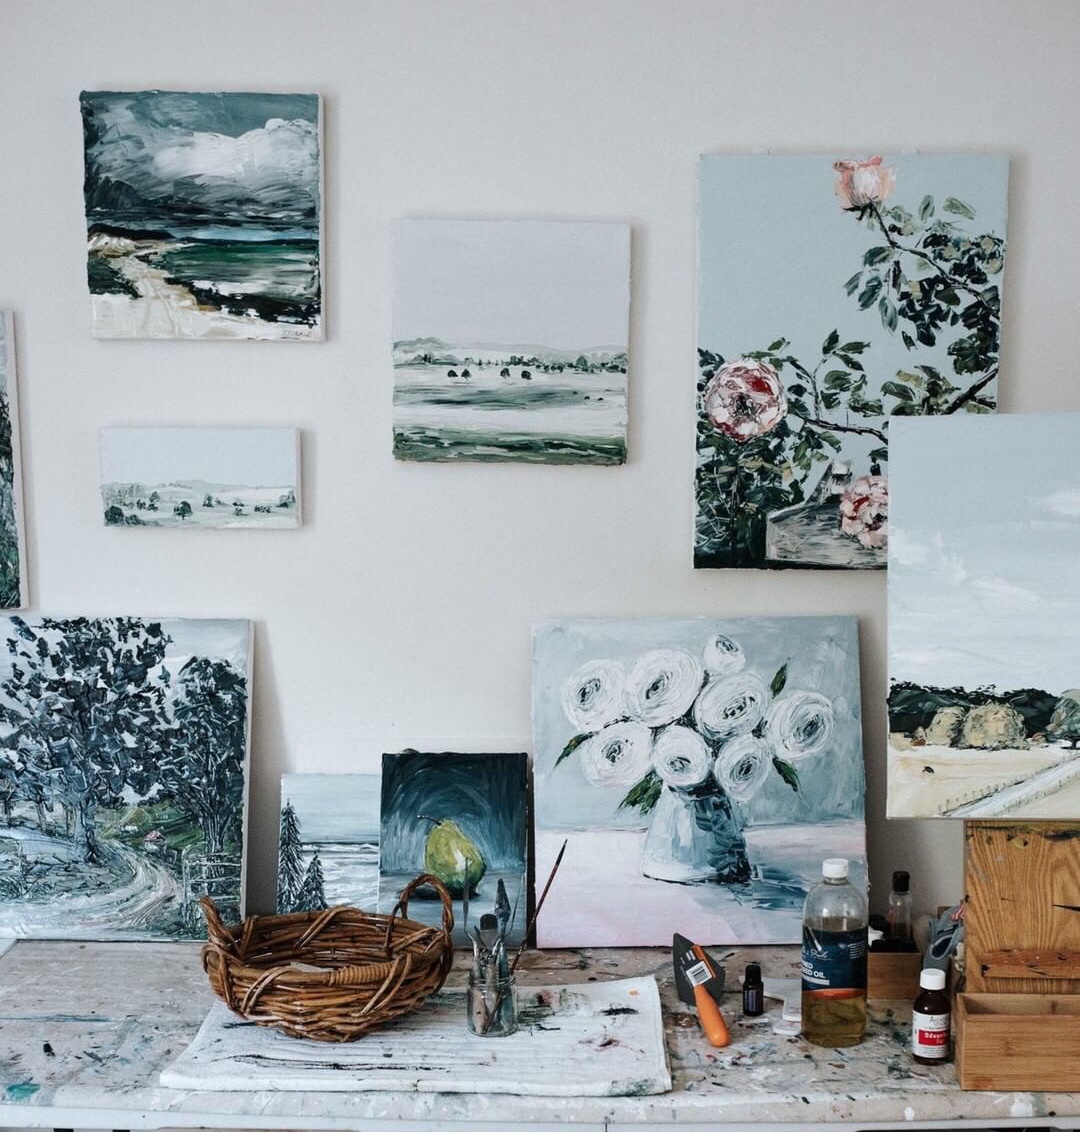 In the studio of Bluethumb artist Michelle Keighley